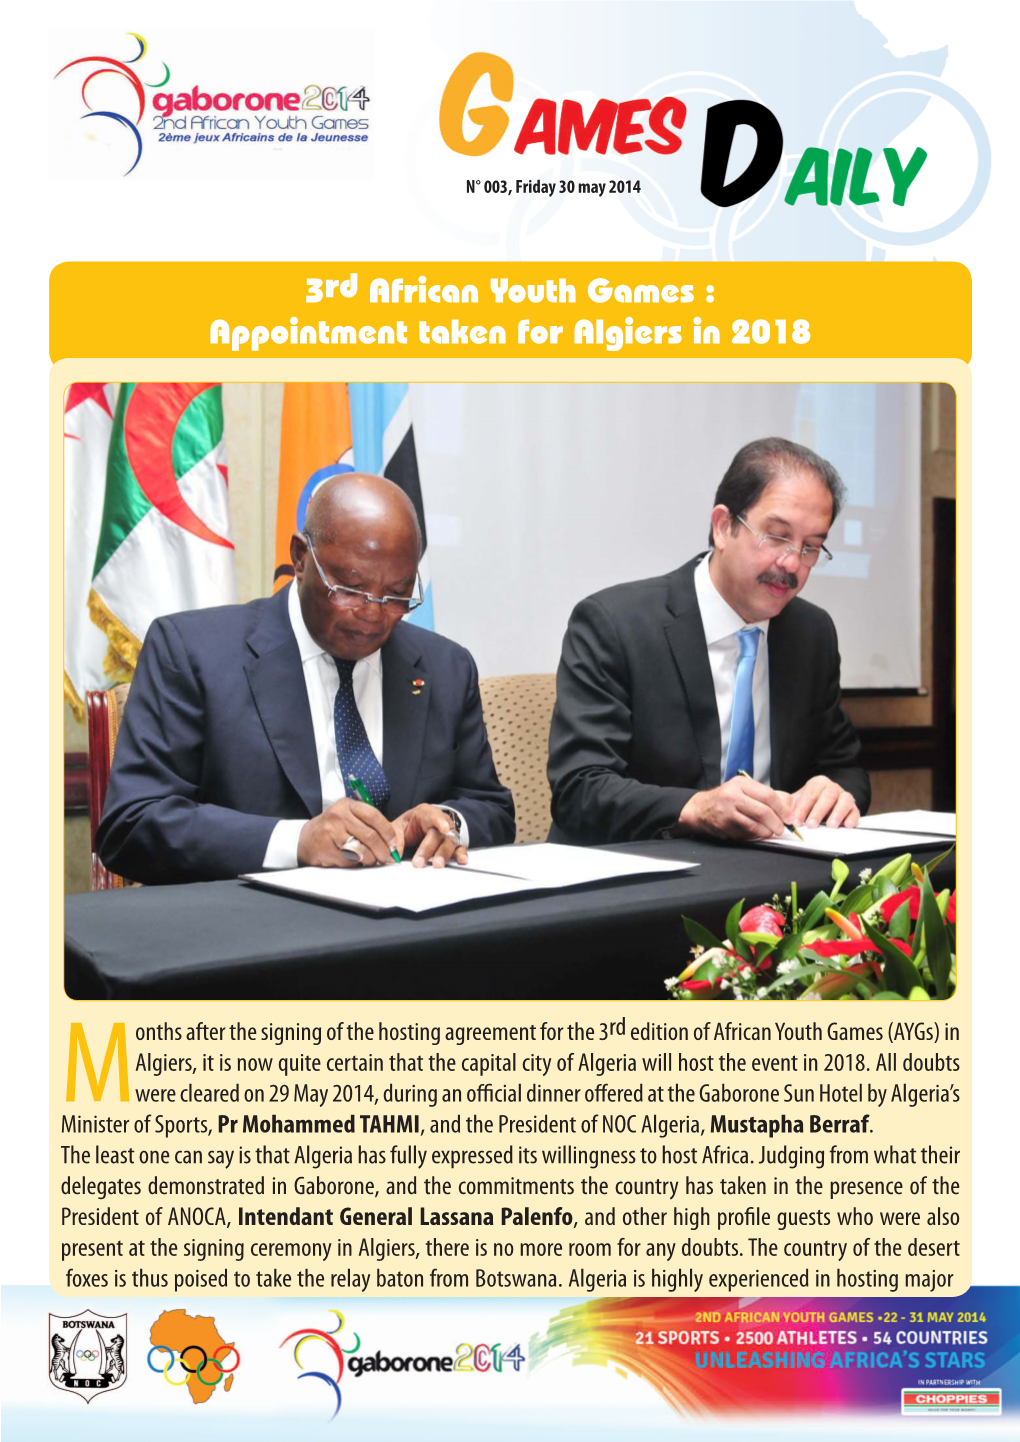 3Rd African Youth Games : Appointment Taken for Algiers in 2018